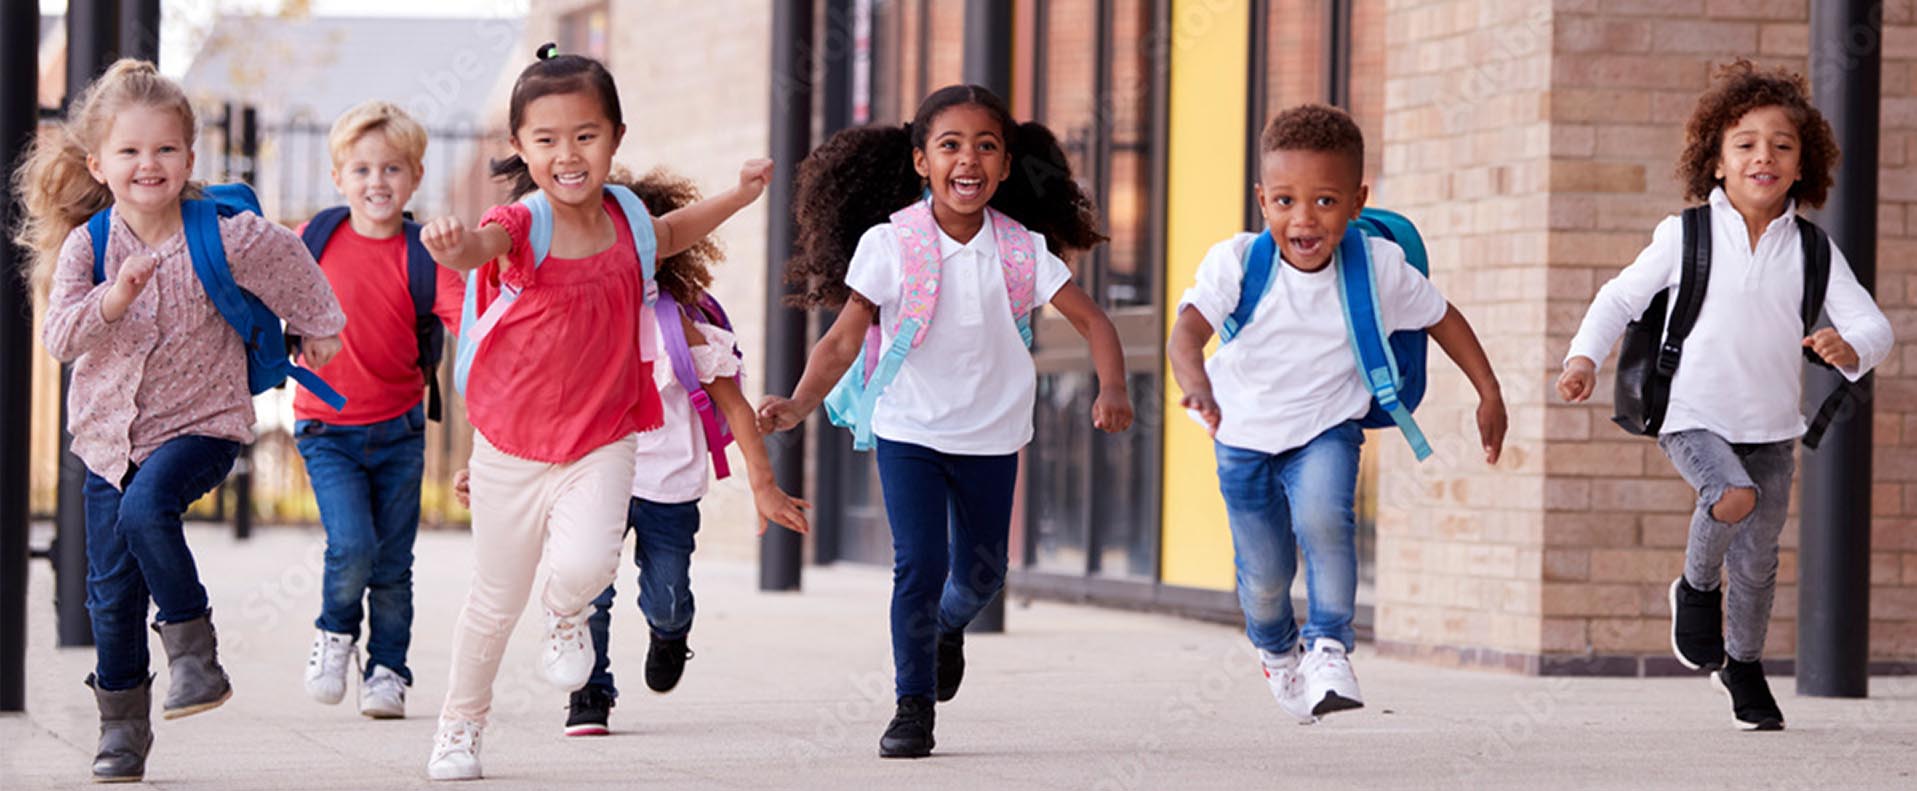 young elementary school children running and playing at school